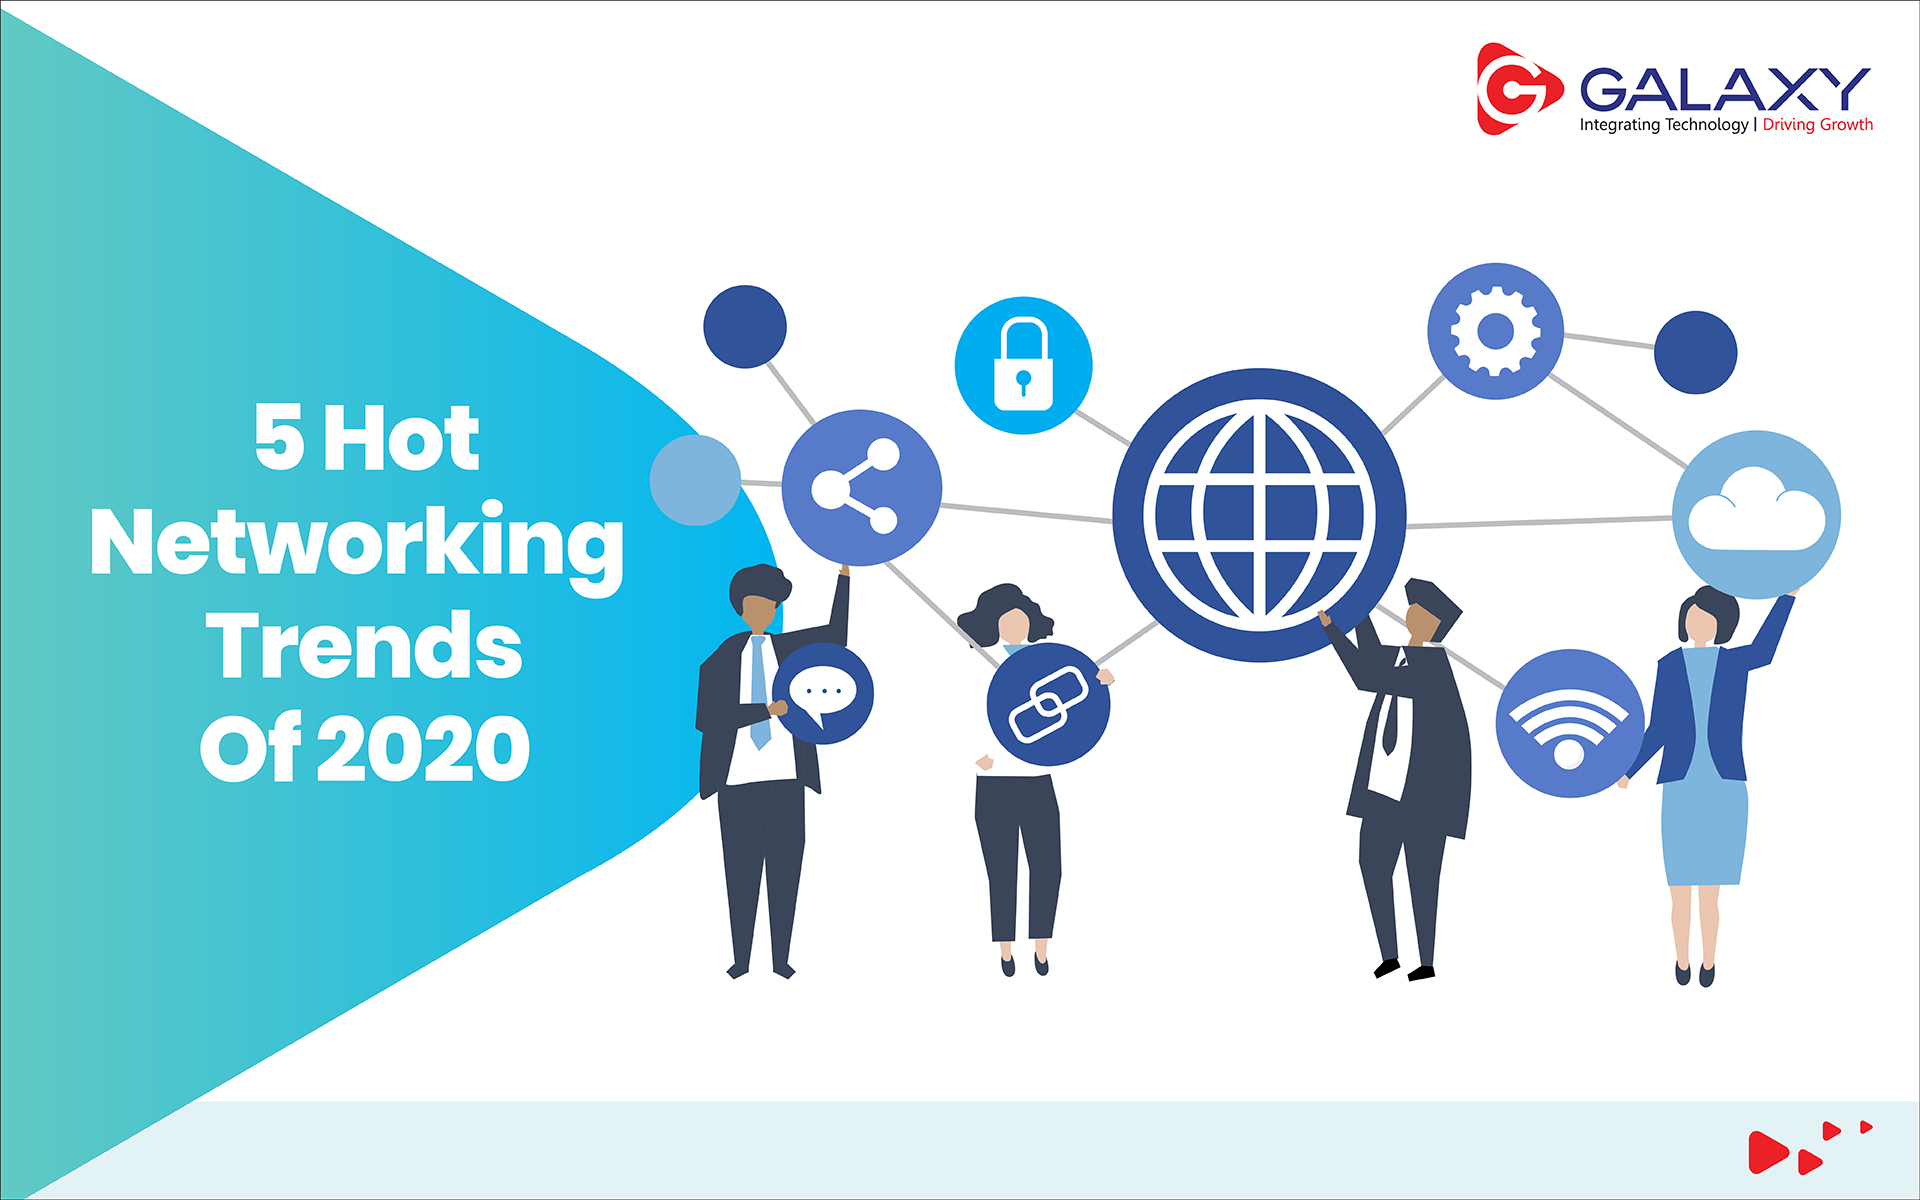 Cisco: 5 Hot Networking Trends For 2020